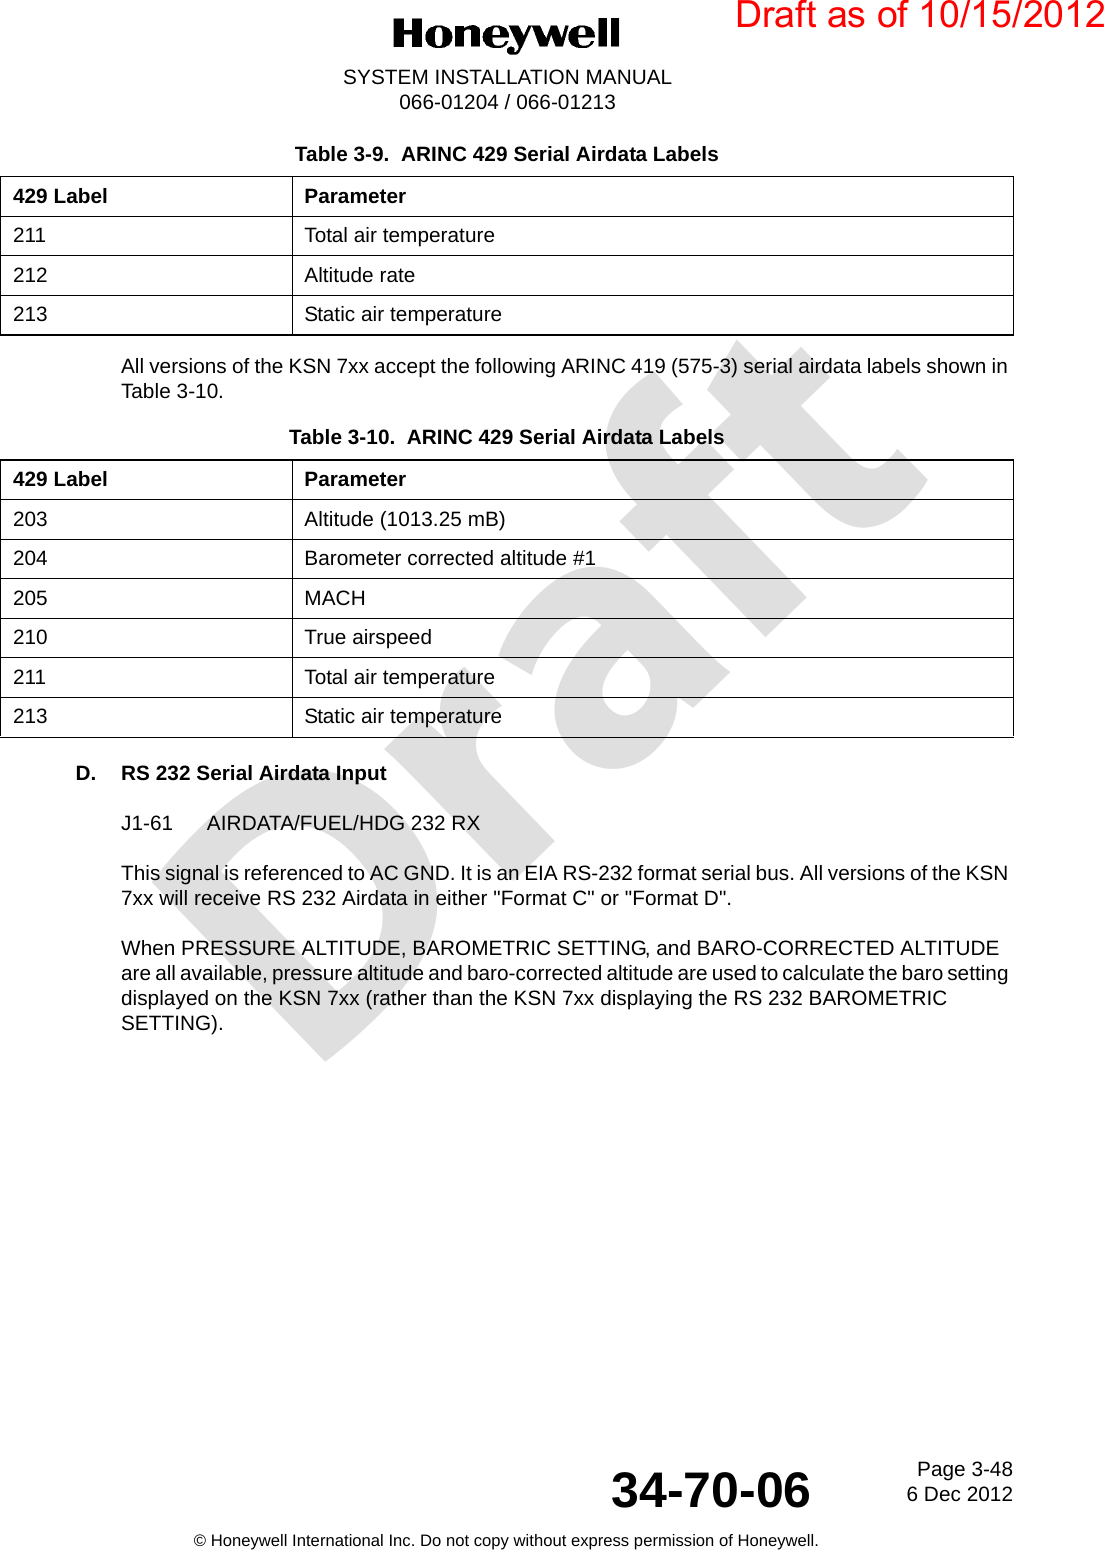 DraftPage 3-486 Dec 201234-70-06SYSTEM INSTALLATION MANUAL066-01204 / 066-01213© Honeywell International Inc. Do not copy without express permission of Honeywell.All versions of the KSN 7xx accept the following ARINC 419 (575-3) serial airdata labels shown in Table 3-10.D. RS 232 Serial Airdata InputJ1-61 AIRDATA/FUEL/HDG 232 RXThis signal is referenced to AC GND. It is an EIA RS-232 format serial bus. All versions of the KSN 7xx will receive RS 232 Airdata in either &quot;Format C&quot; or &quot;Format D&quot;.When PRESSURE ALTITUDE, BAROMETRIC SETTING, and BARO-CORRECTED ALTITUDE are all available, pressure altitude and baro-corrected altitude are used to calculate the baro setting displayed on the KSN 7xx (rather than the KSN 7xx displaying the RS 232 BAROMETRIC SETTING).211 Total air temperature212 Altitude rate213 Static air temperatureTable 3-10.  ARINC 429 Serial Airdata Labels429 Label Parameter203 Altitude (1013.25 mB)204 Barometer corrected altitude #1205 MACH210 True airspeed211 Total air temperature213 Static air temperatureTable 3-9.  ARINC 429 Serial Airdata Labels429 Label ParameterDraft as of 10/15/2012